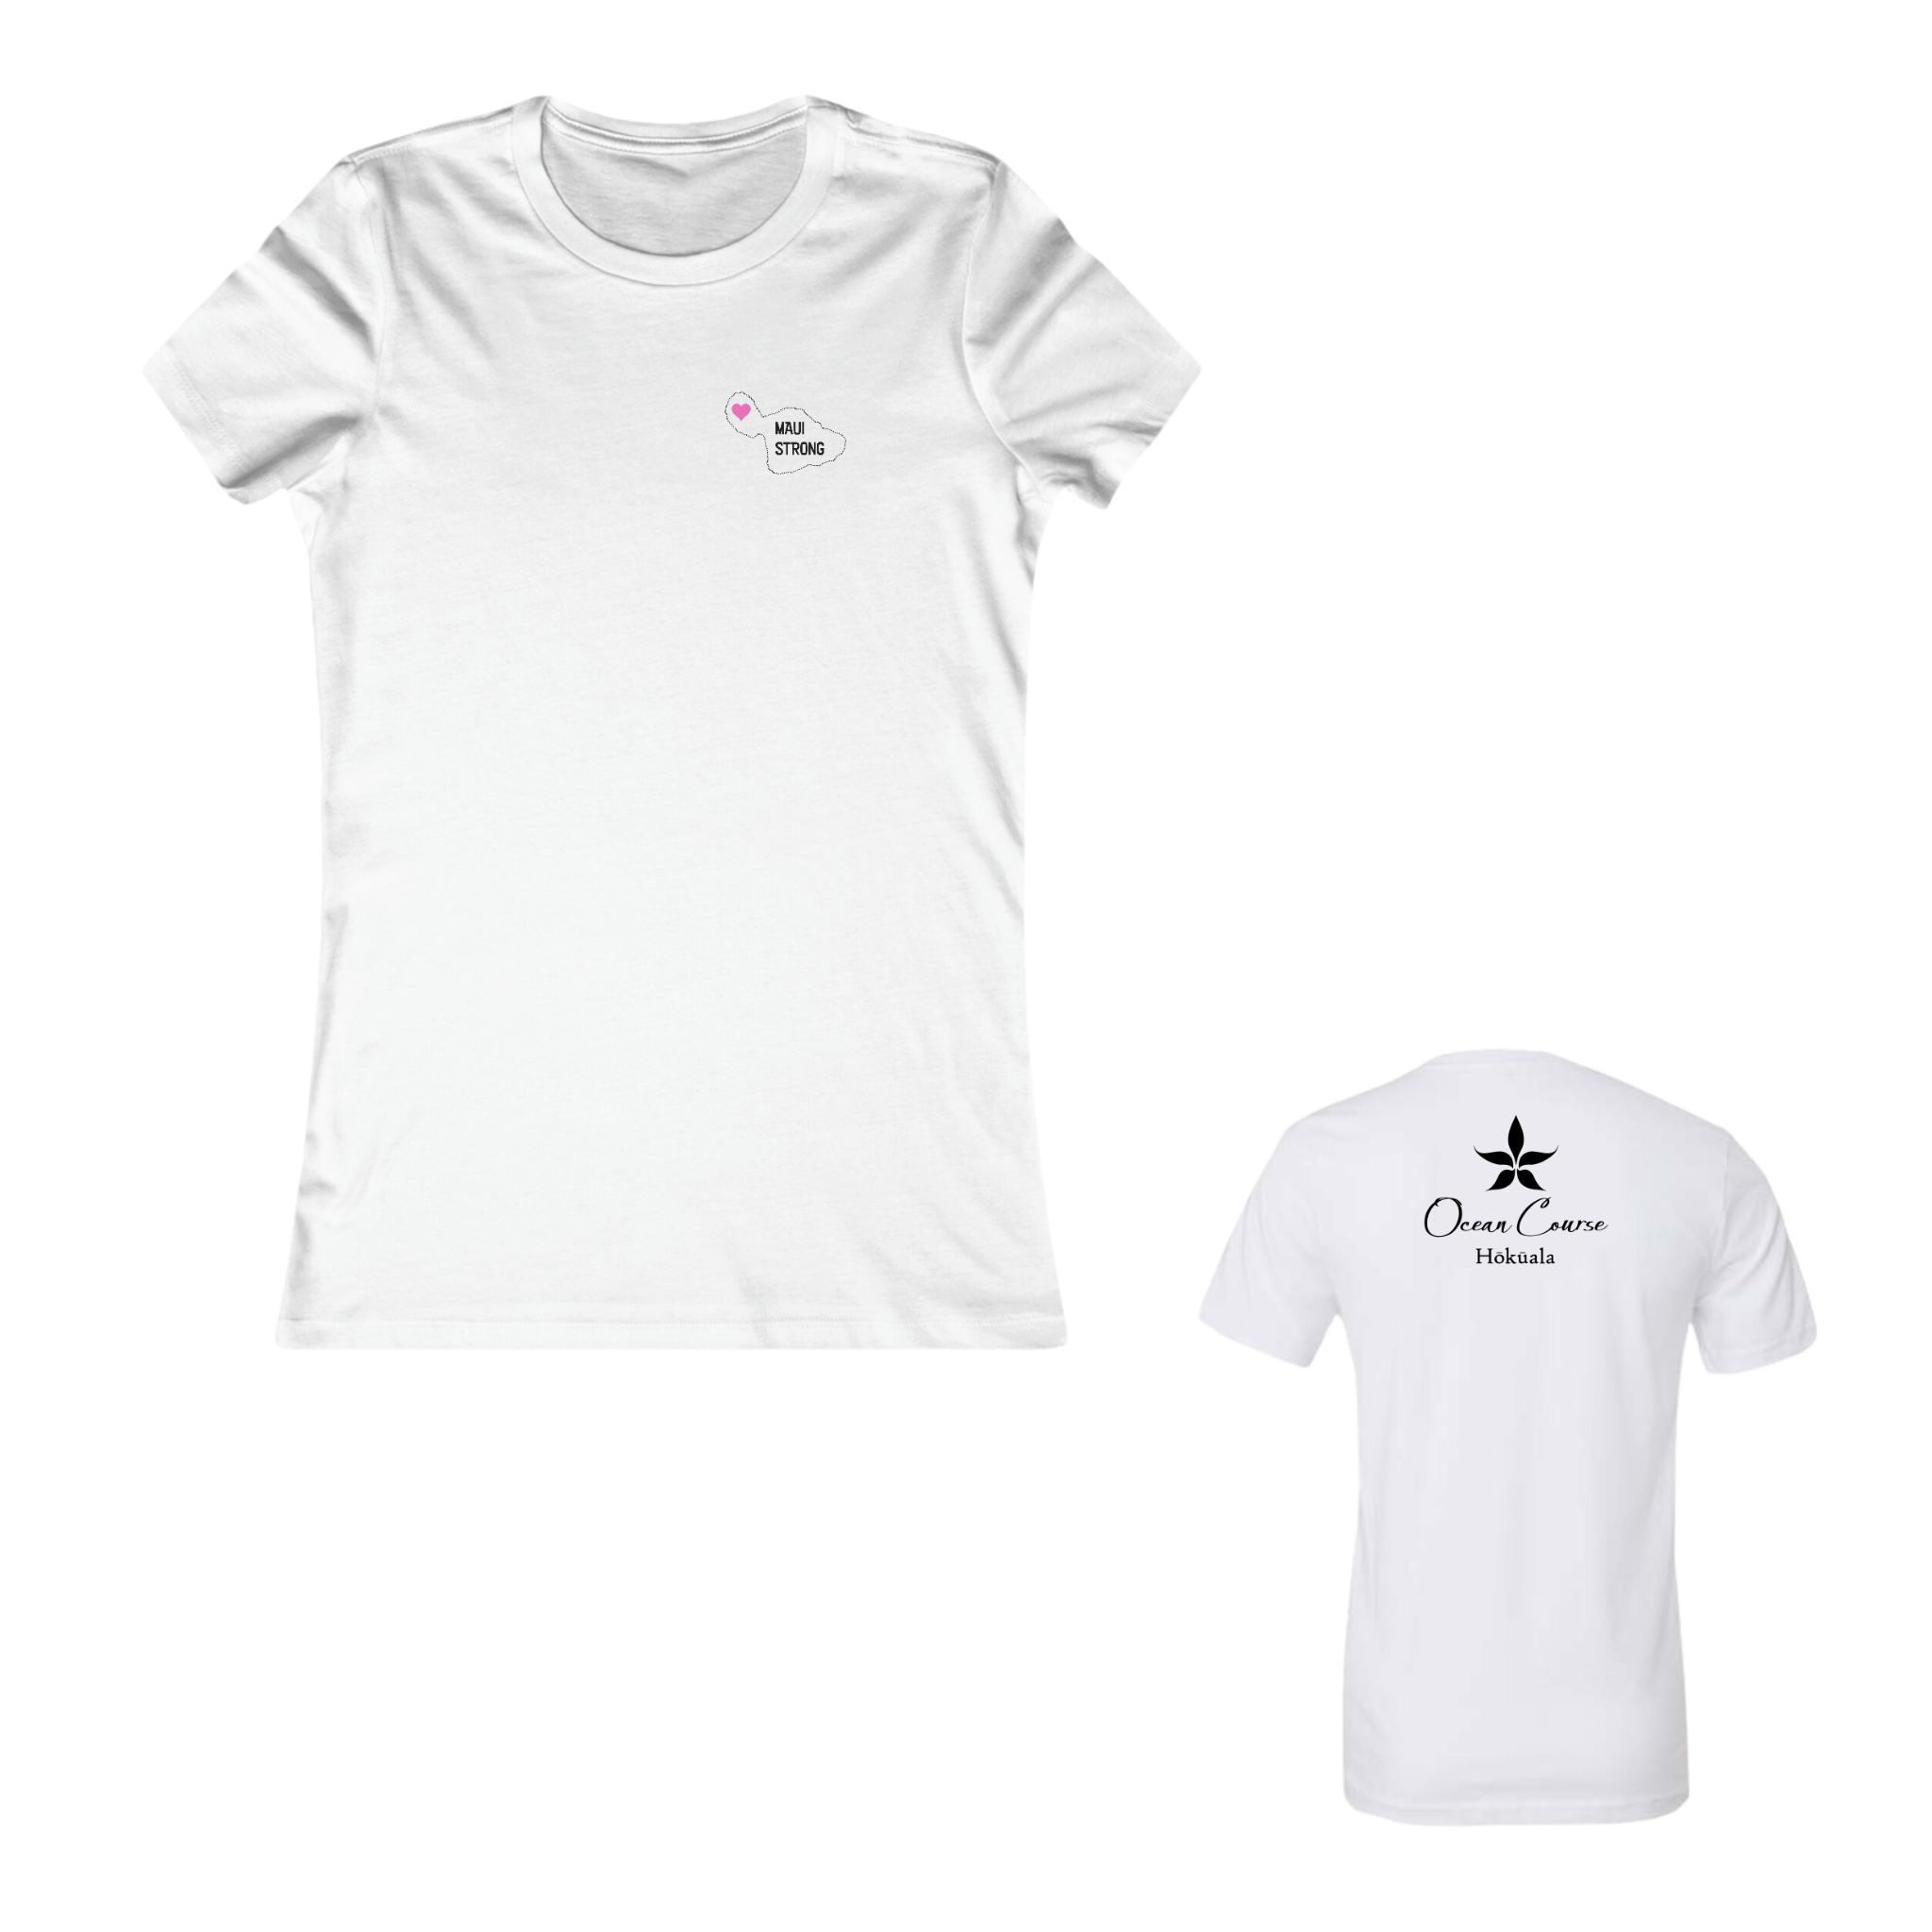 Women's Slim Fit Tee - Maui Strong + Ocean Course at Hokuala